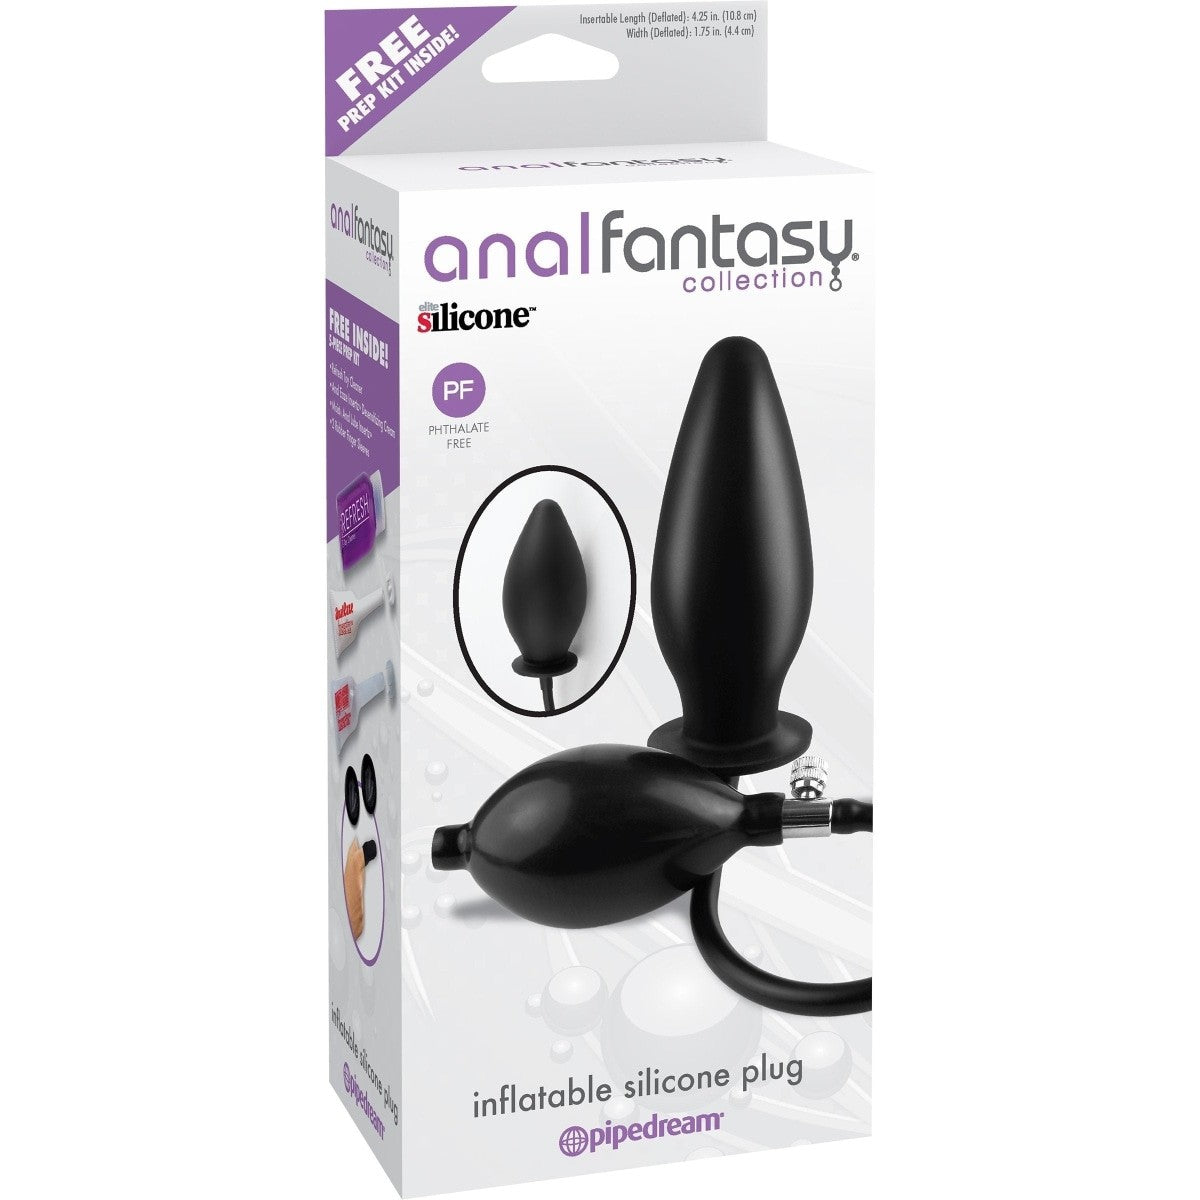 Anal Fantasy Inflatable Silicone Plug Intimates Adult Boutique